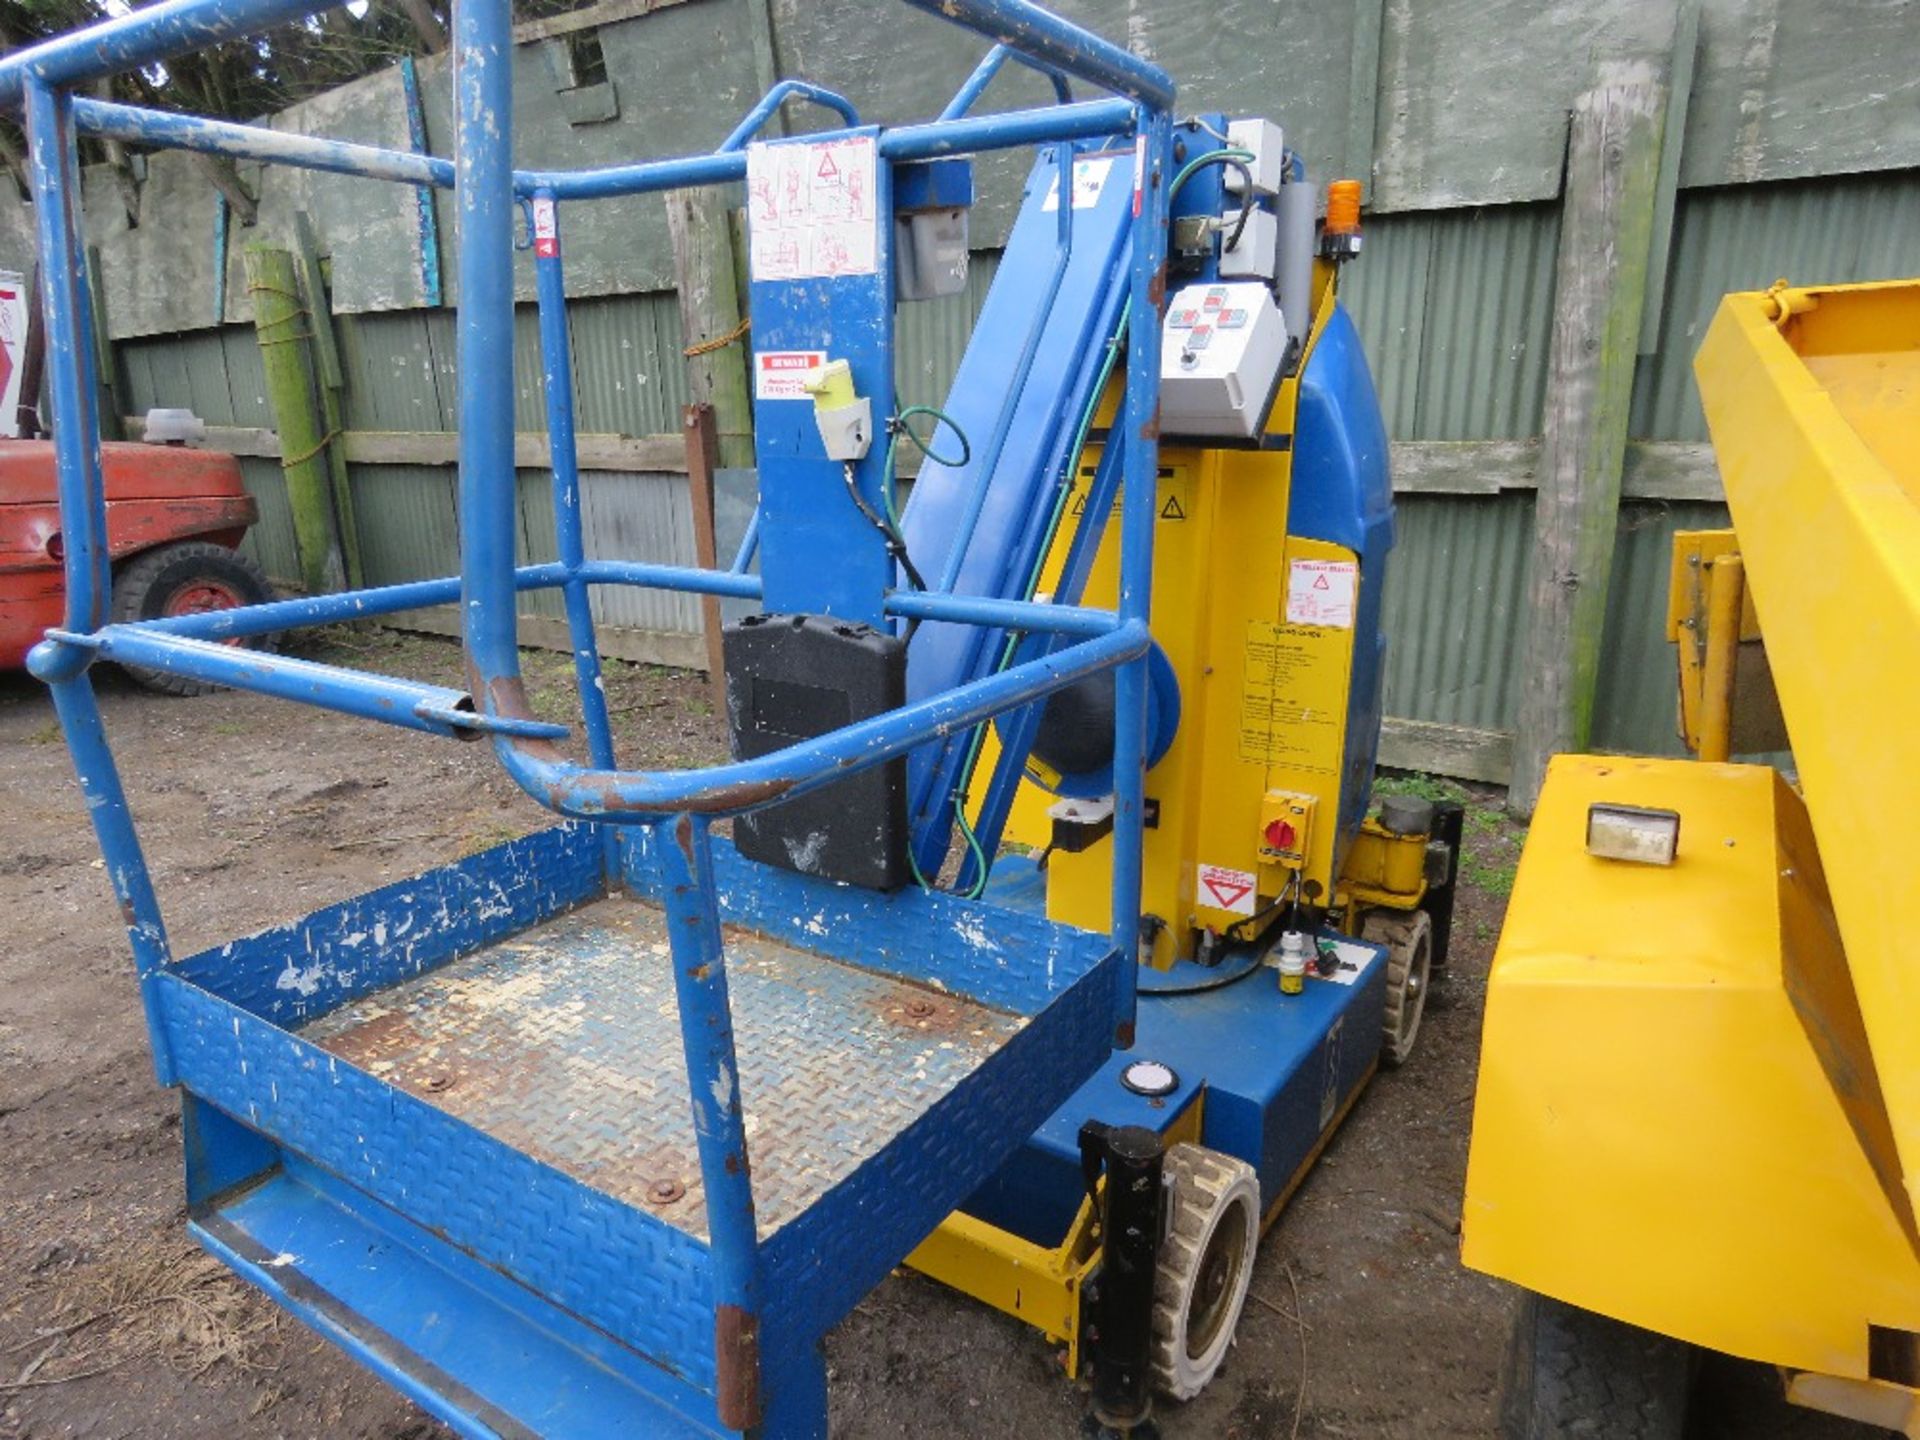 ABM ORION 1000 SELF PROPELLED 10 METRE MAST ACCESS LIFT UNIT WITH OUTRIGGERS YEAR 2001. SN:011006118 - Bild 4 aus 12